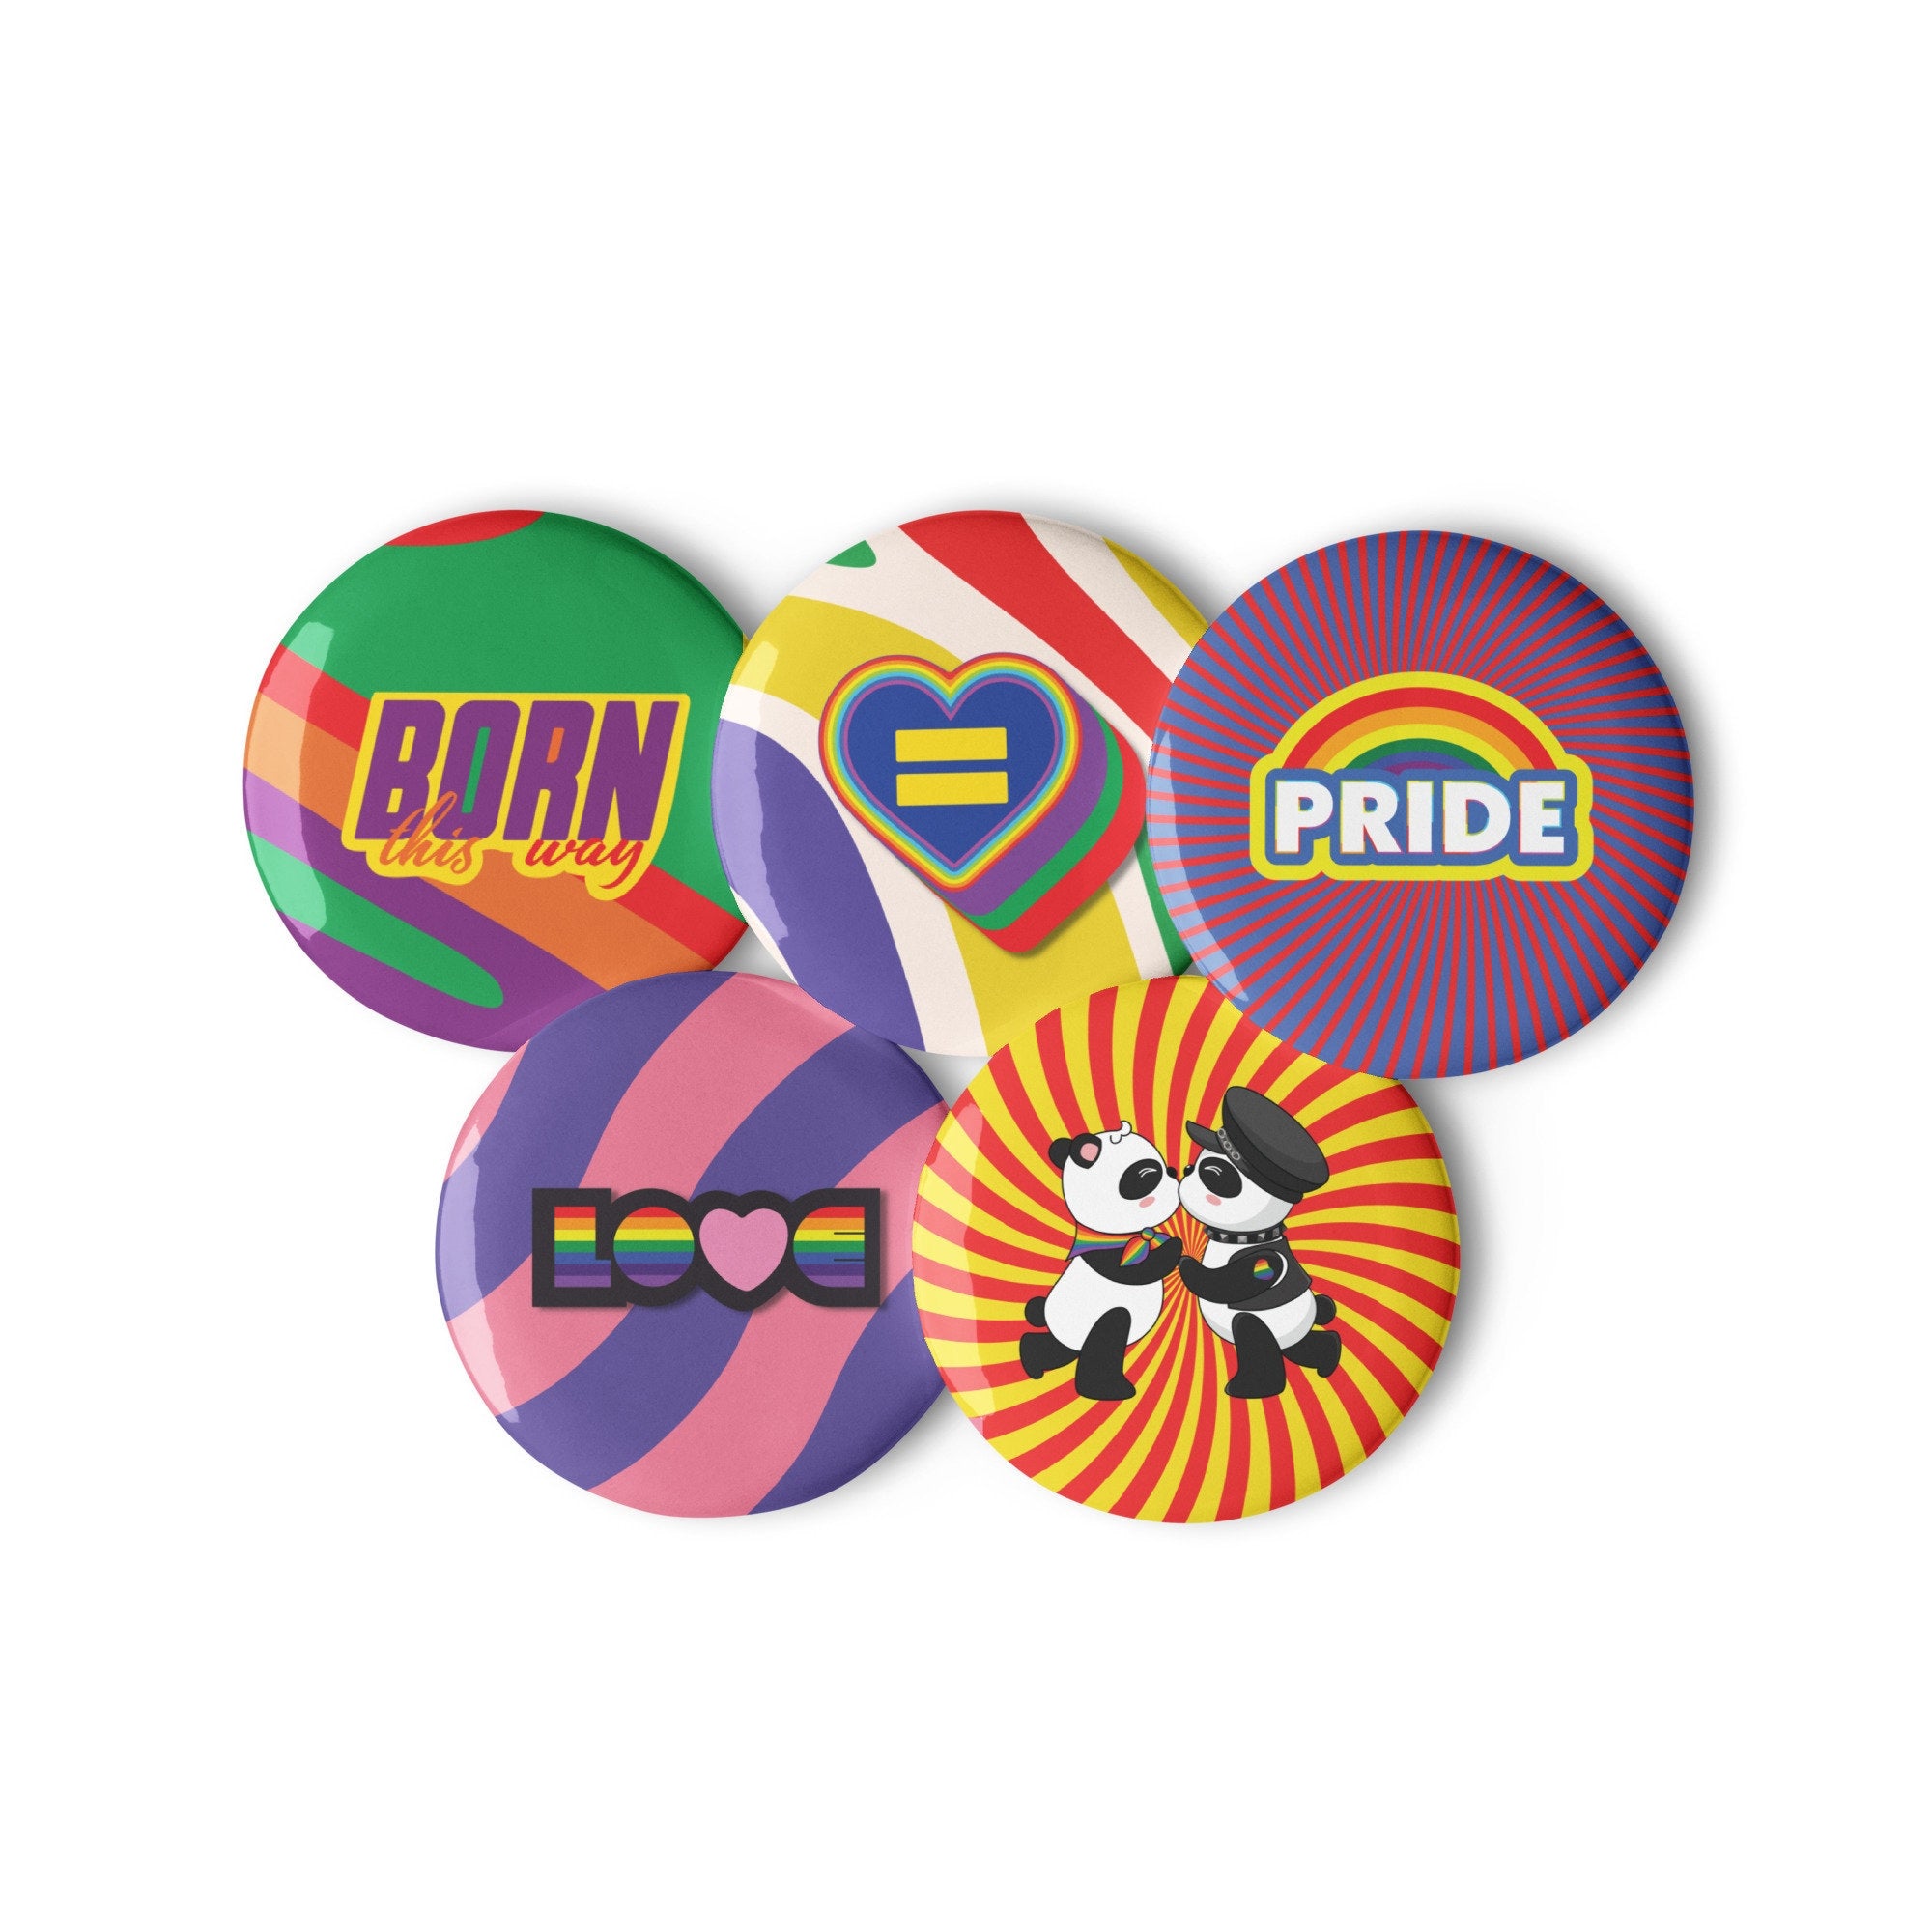 Proudly You LGBTQ Pride Button Pins Set - 5 Pack  Pride Pin, Gay Pins, Gay Pride, LGBTQ Pins - Show your True Colors